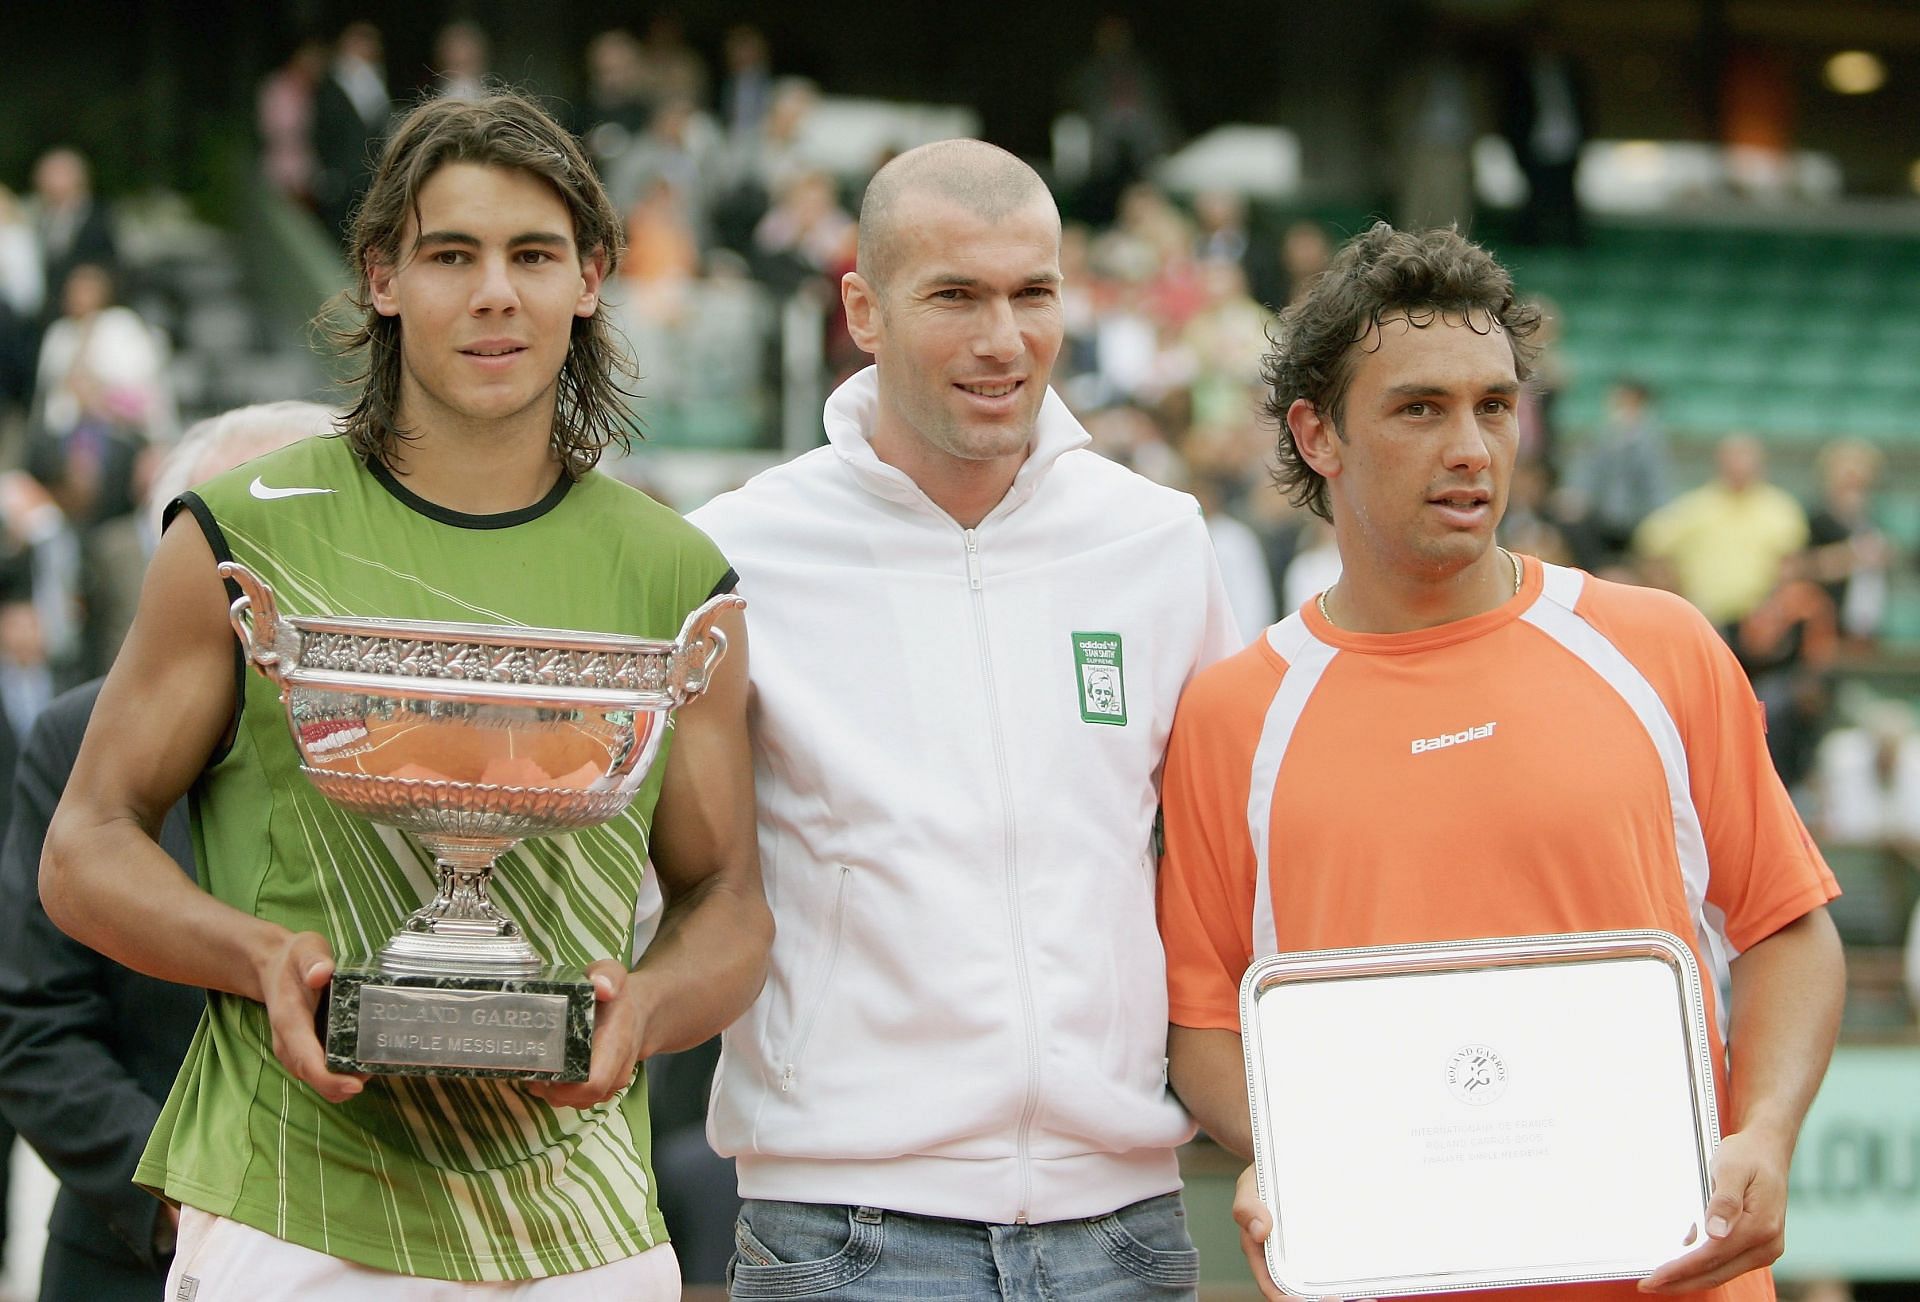 Rafael Nadal (L) and Mariano Puerta (R) at the 2005 French Open.